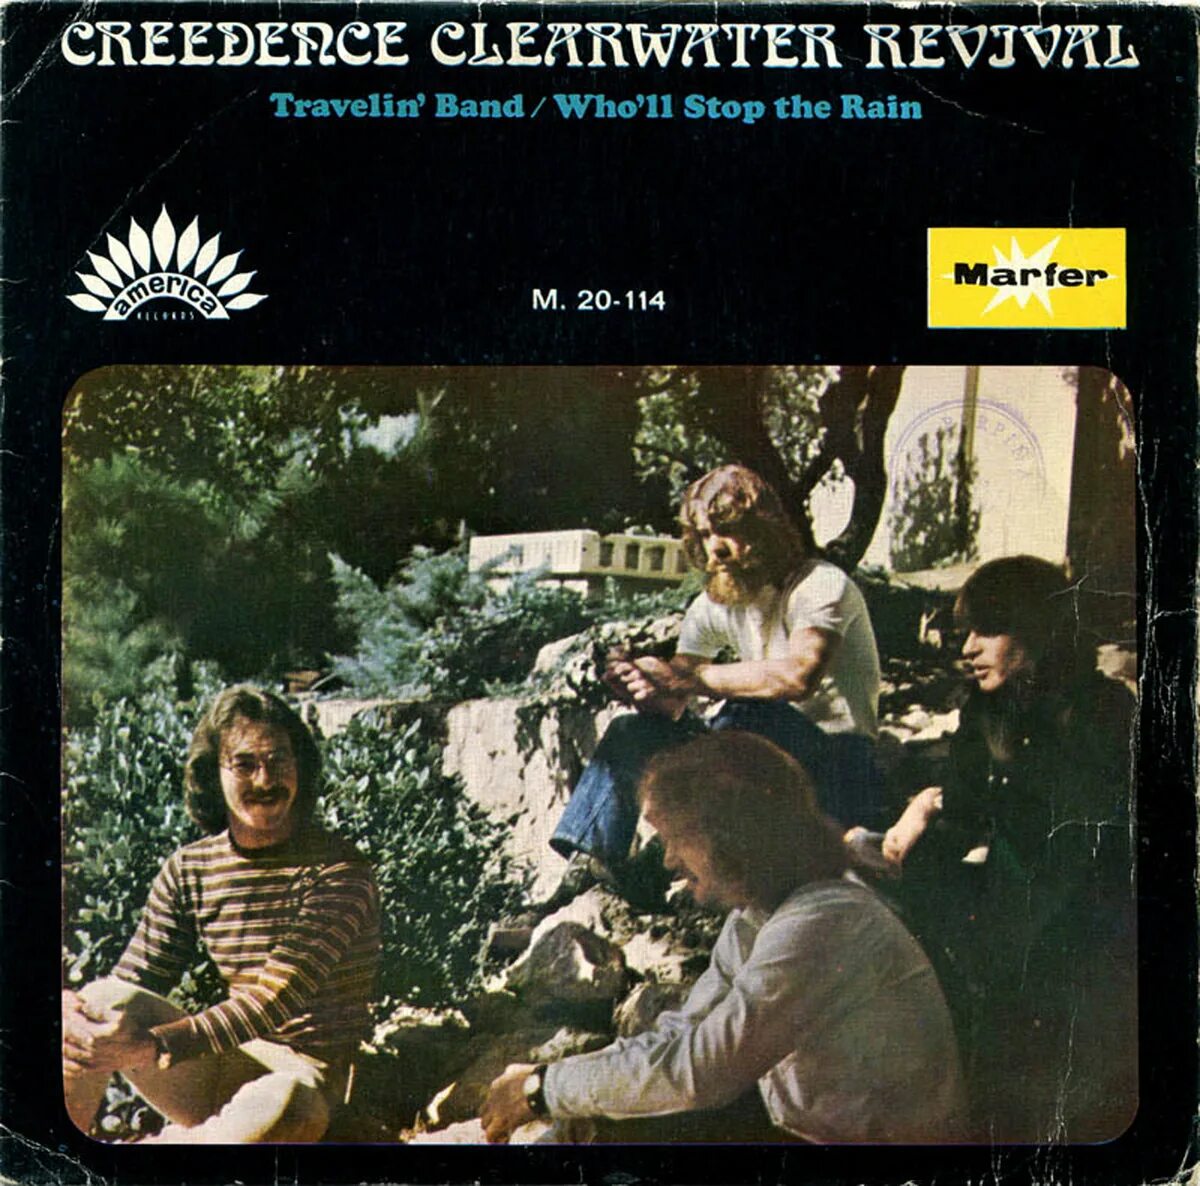 Creedence Clearwater Revival Travelin' Band. Creedence Clearwater Revival – Travelin’ Band (2022). Creedence Clearwater Revival who'll stop the Rain. Creedence stop the Rain. Creedence clearwater revival rain